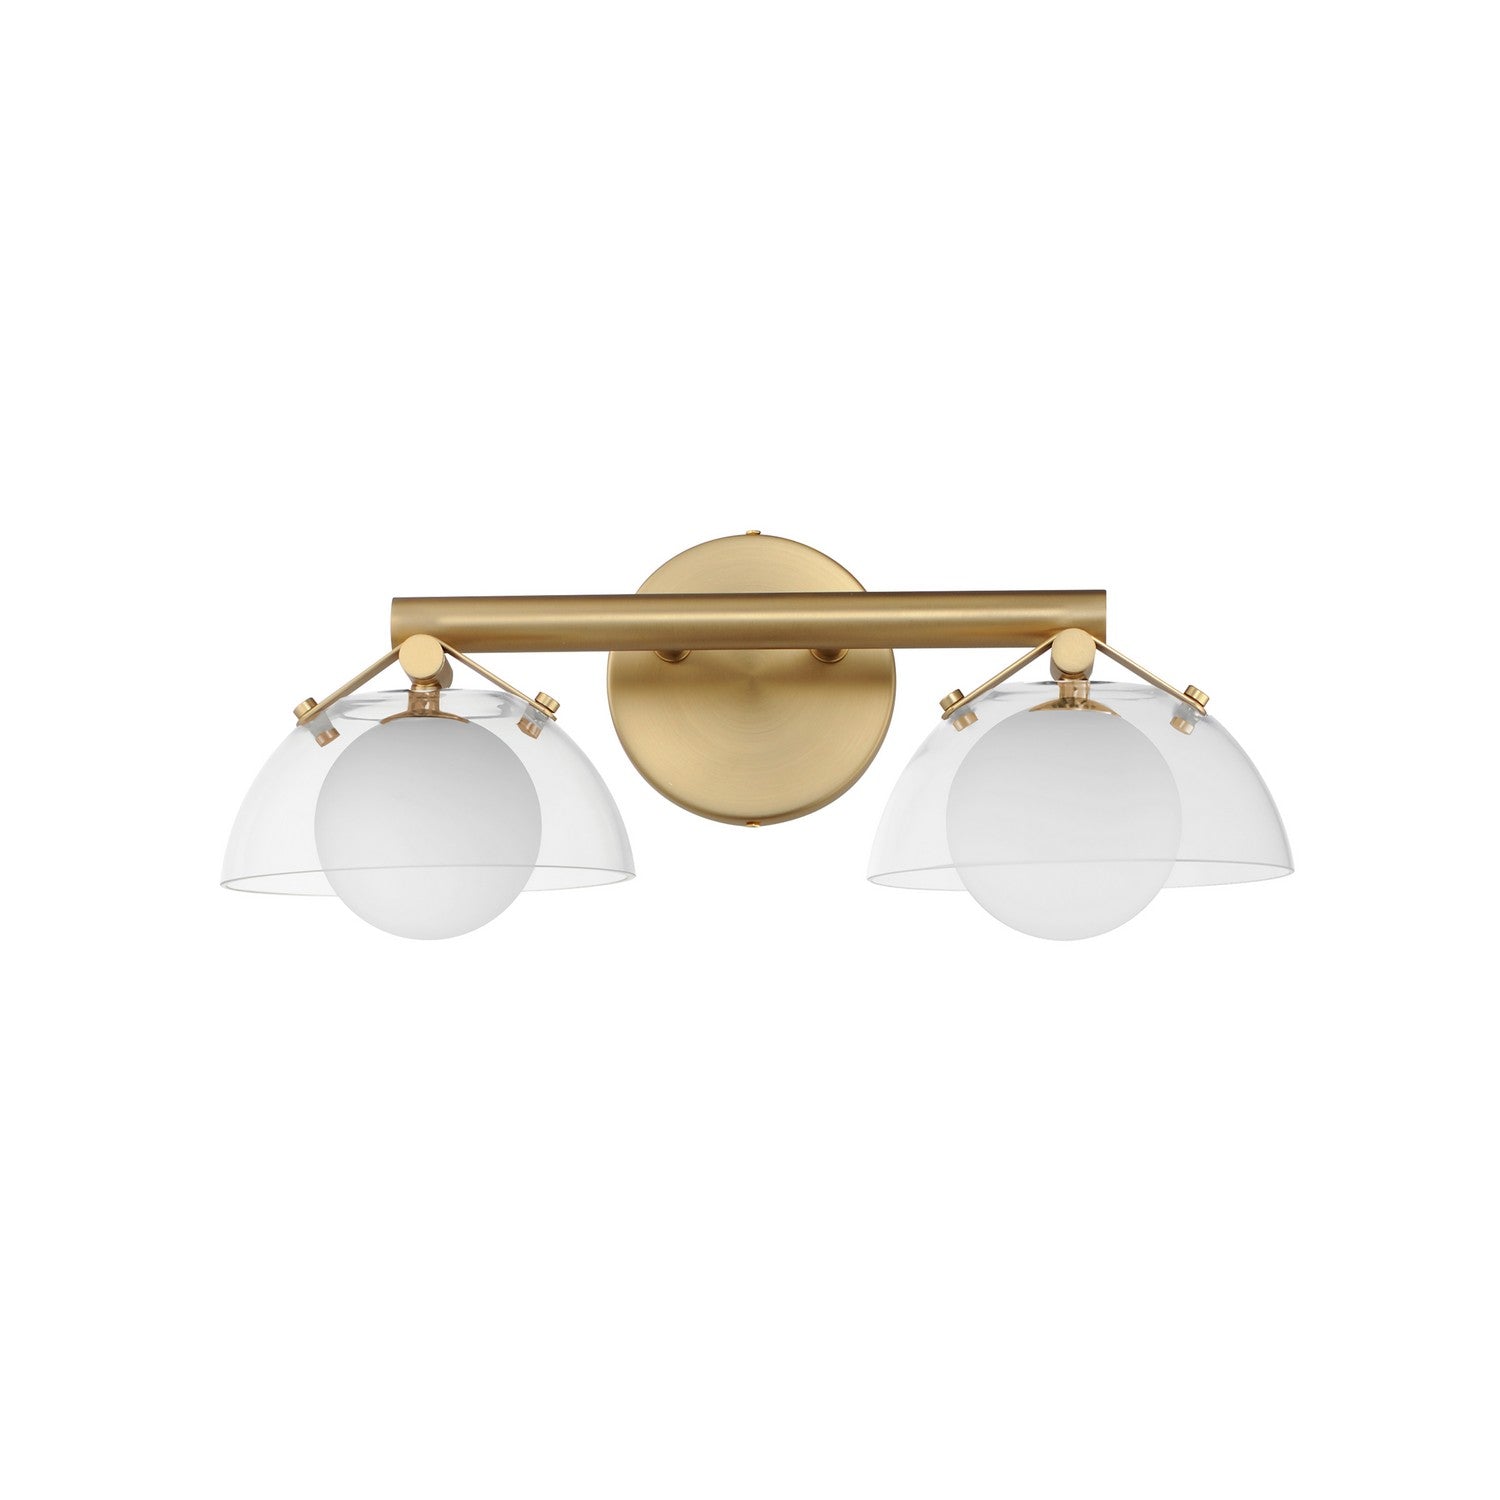 Studio M - SM31002CLNAB - LED Wall Sconce - Domain - Natural Aged Brass